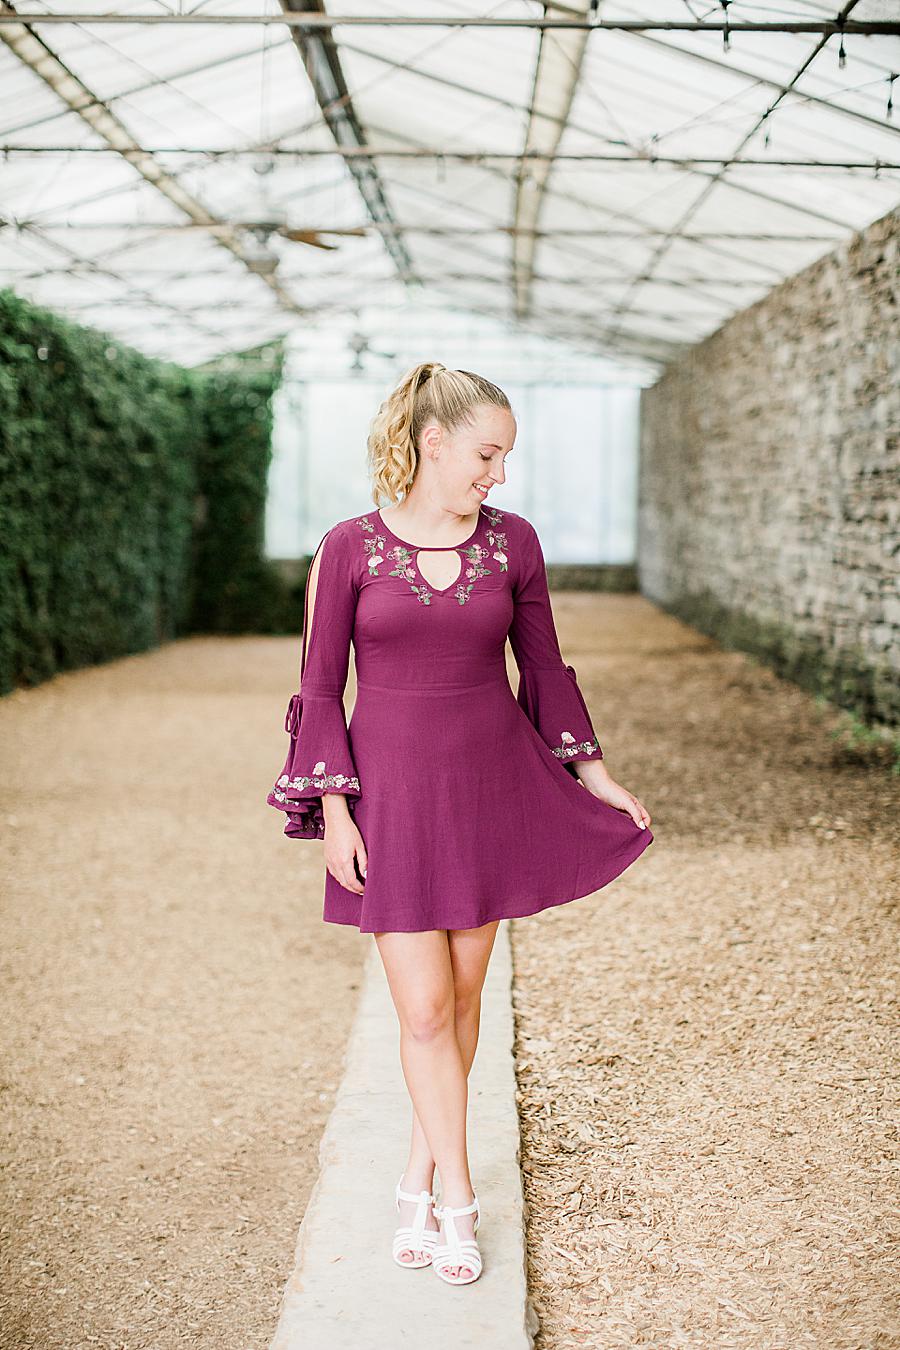 Greenhouse at this Knoxville Senior by Knoxville Wedding Photographer, Amanda May Photos